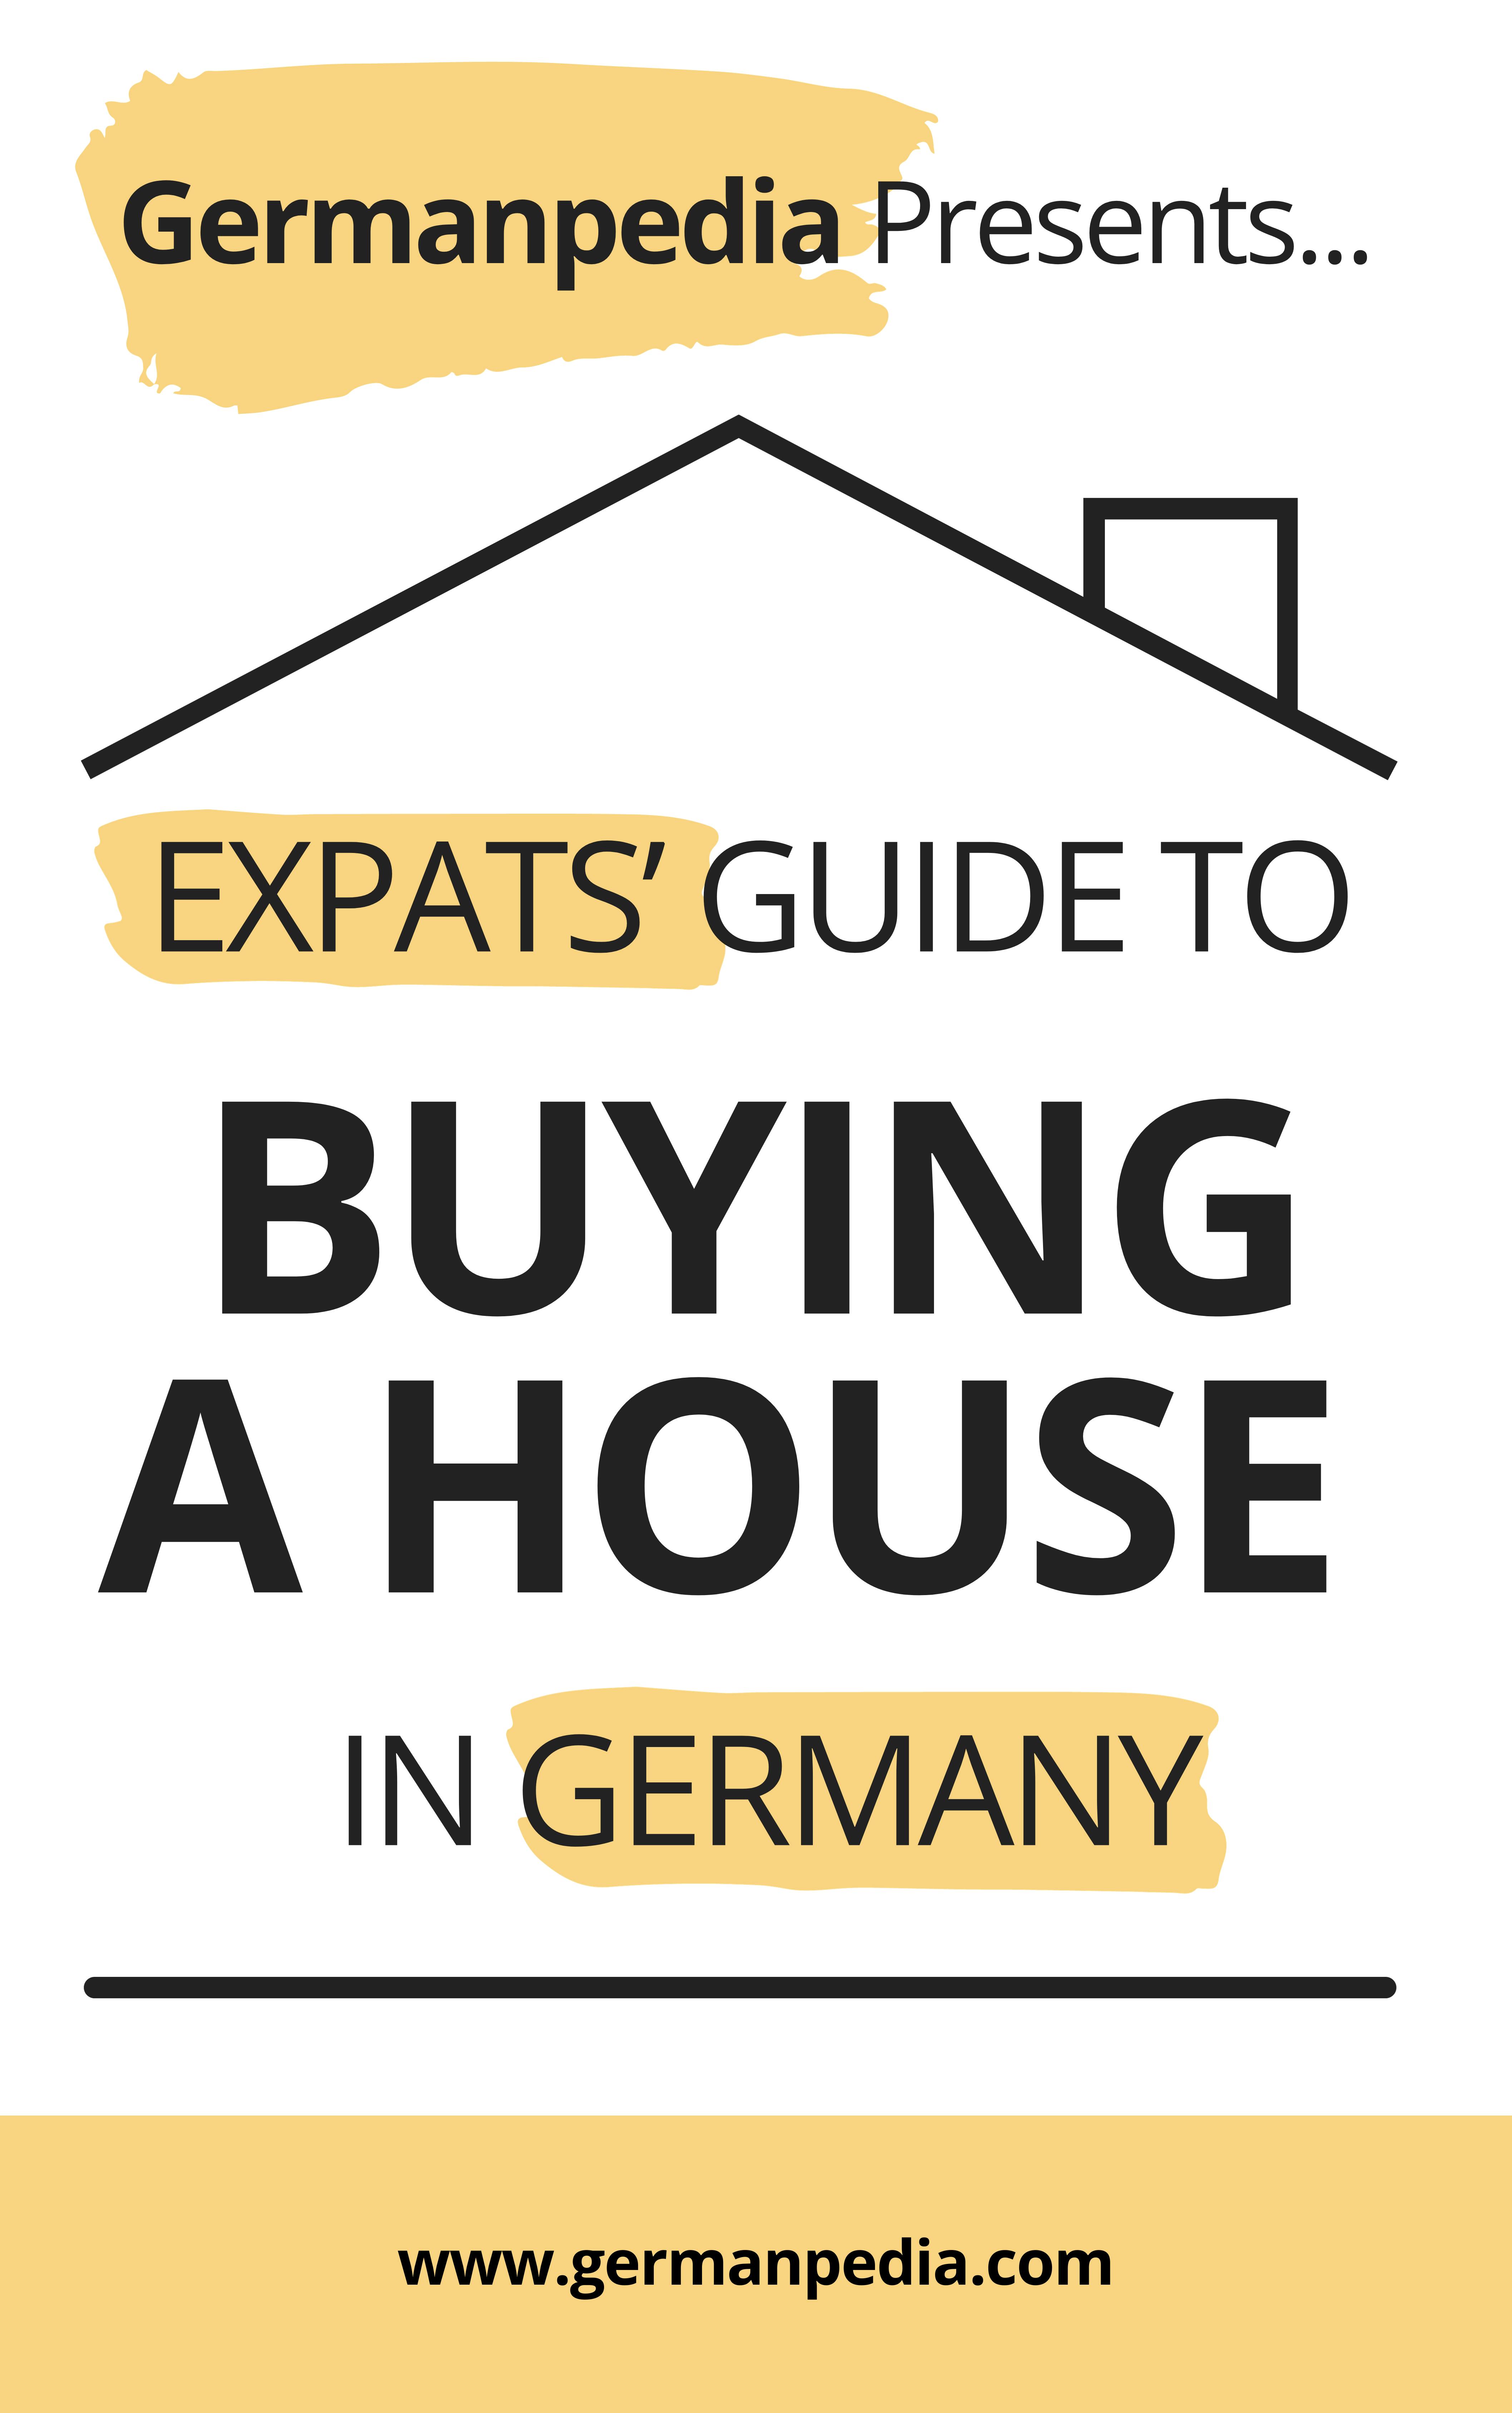 Expats guide on buying a house in Germany